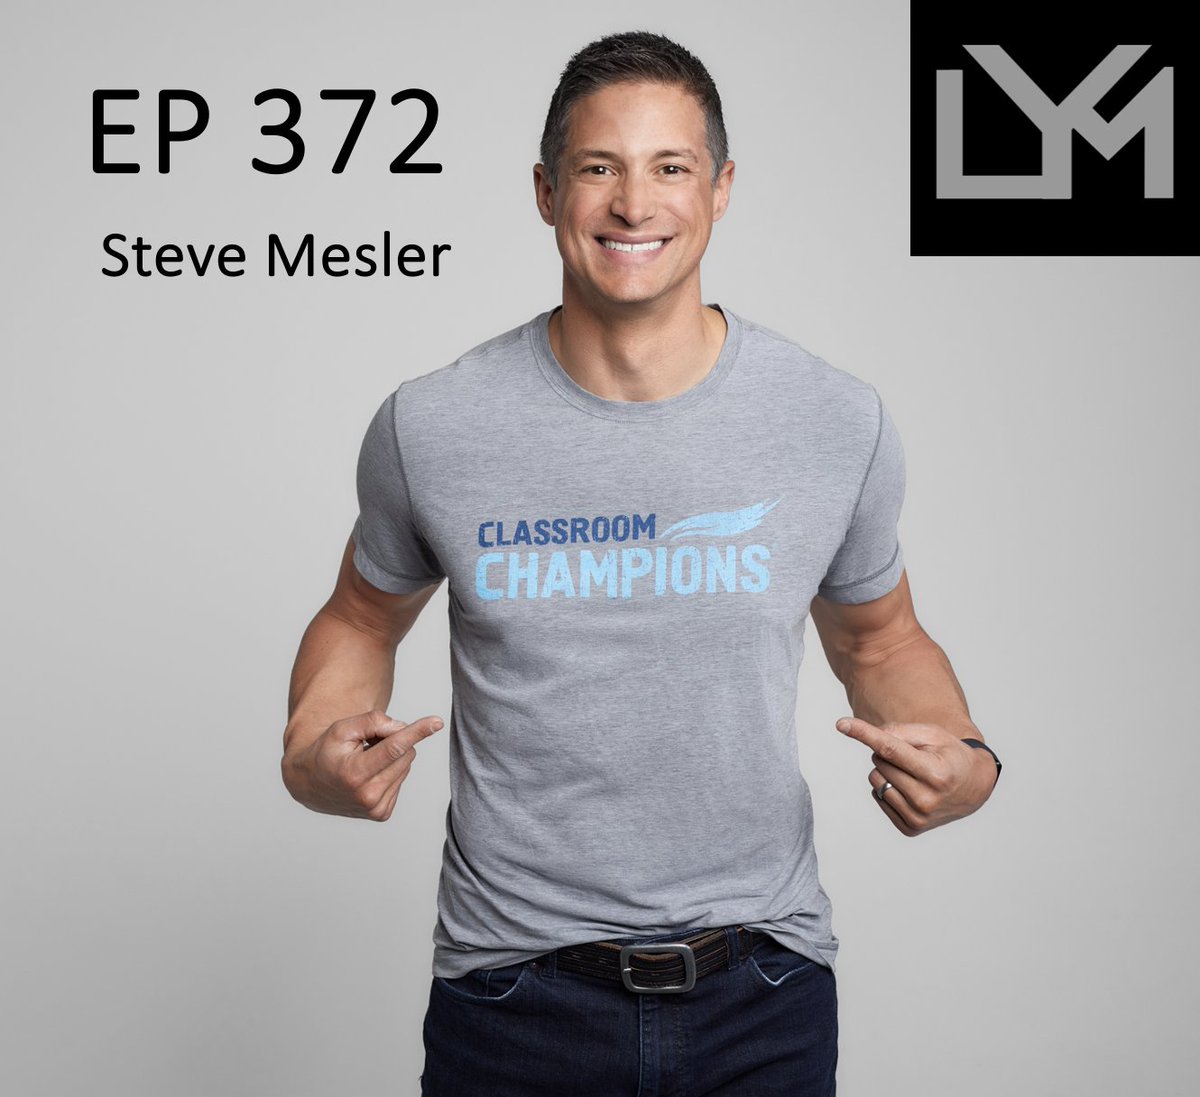 Steve Mesler is my guest this week on LYM EP 372. In 2011, he founded Classroom Champions with his sister Dr. Leigh Parise, the Director of Program Development at MDRC #LeaveYourMark
podcasts.apple.com/ca/podcast/can…